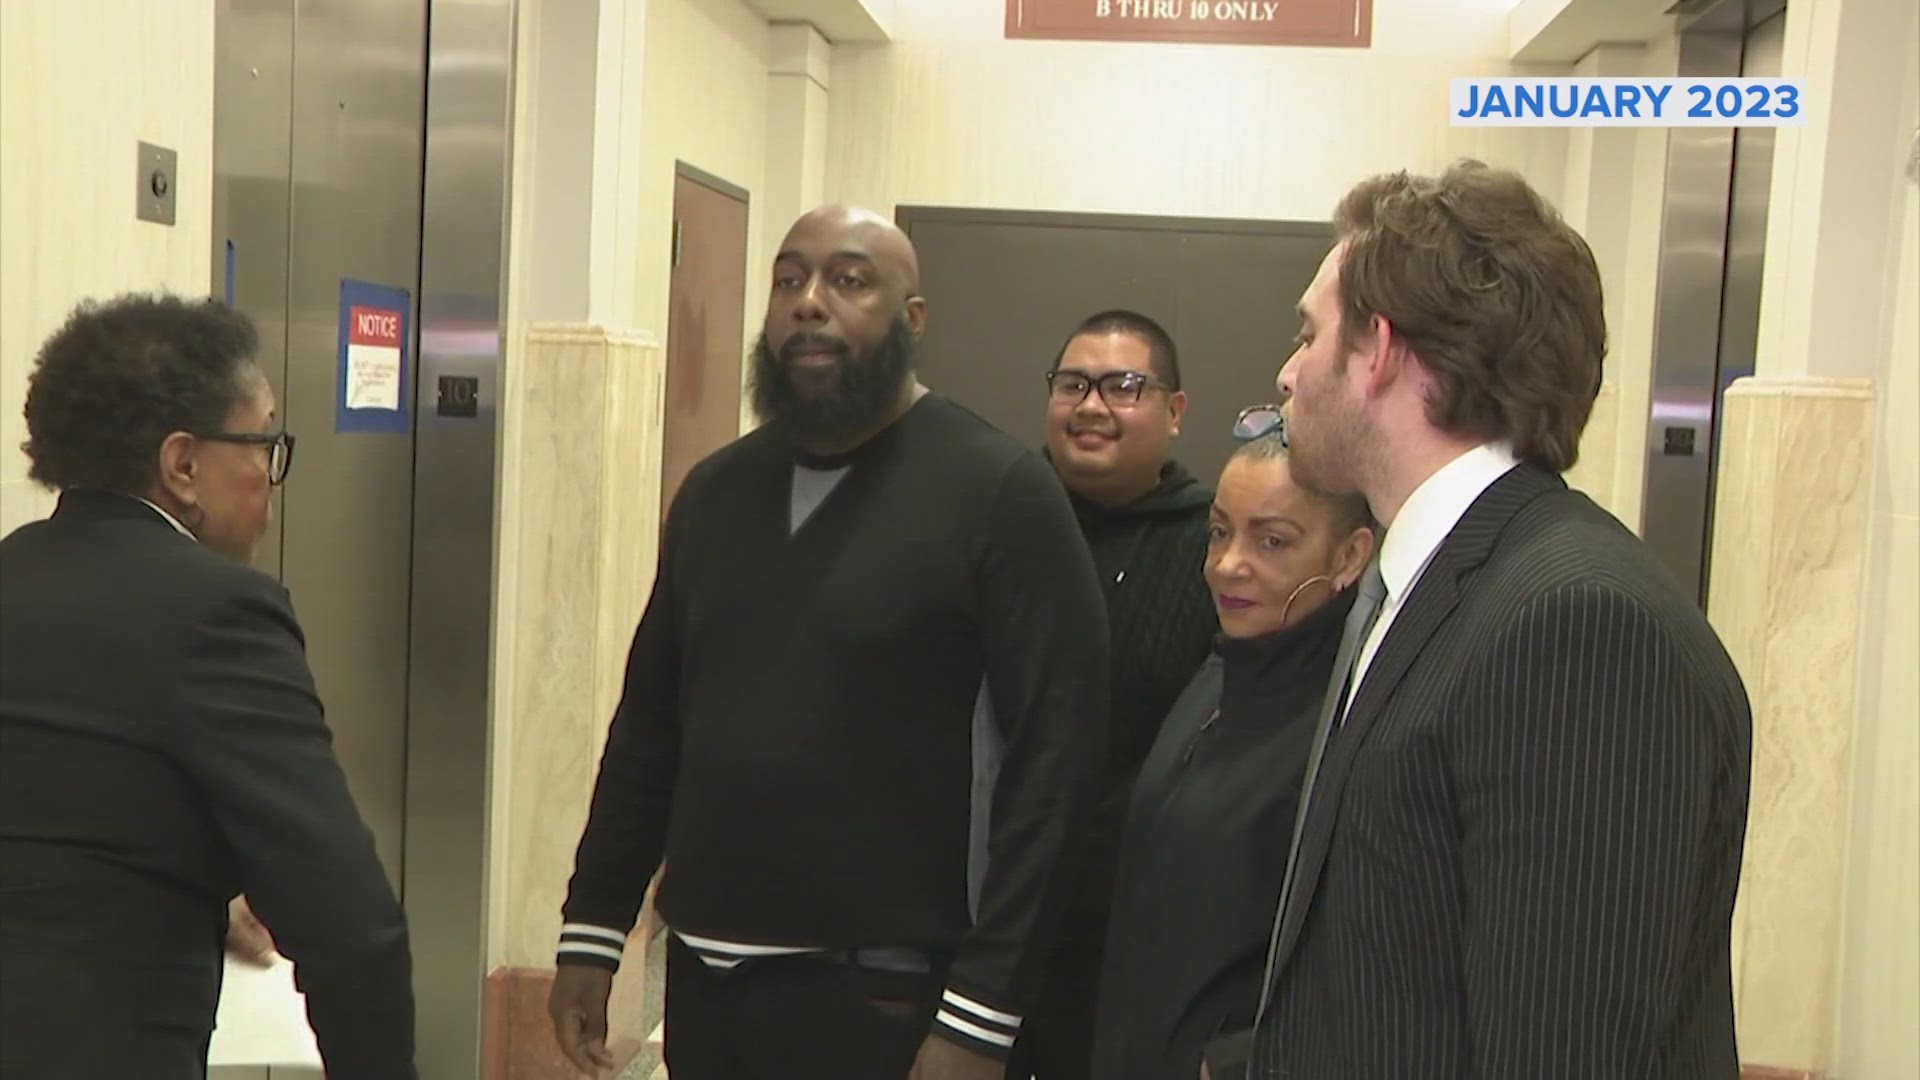 The Harris County District Attorney's Office said the assault-bodily injury charge was dropped because Trae Tha Truth completed a pretrial diversion program.